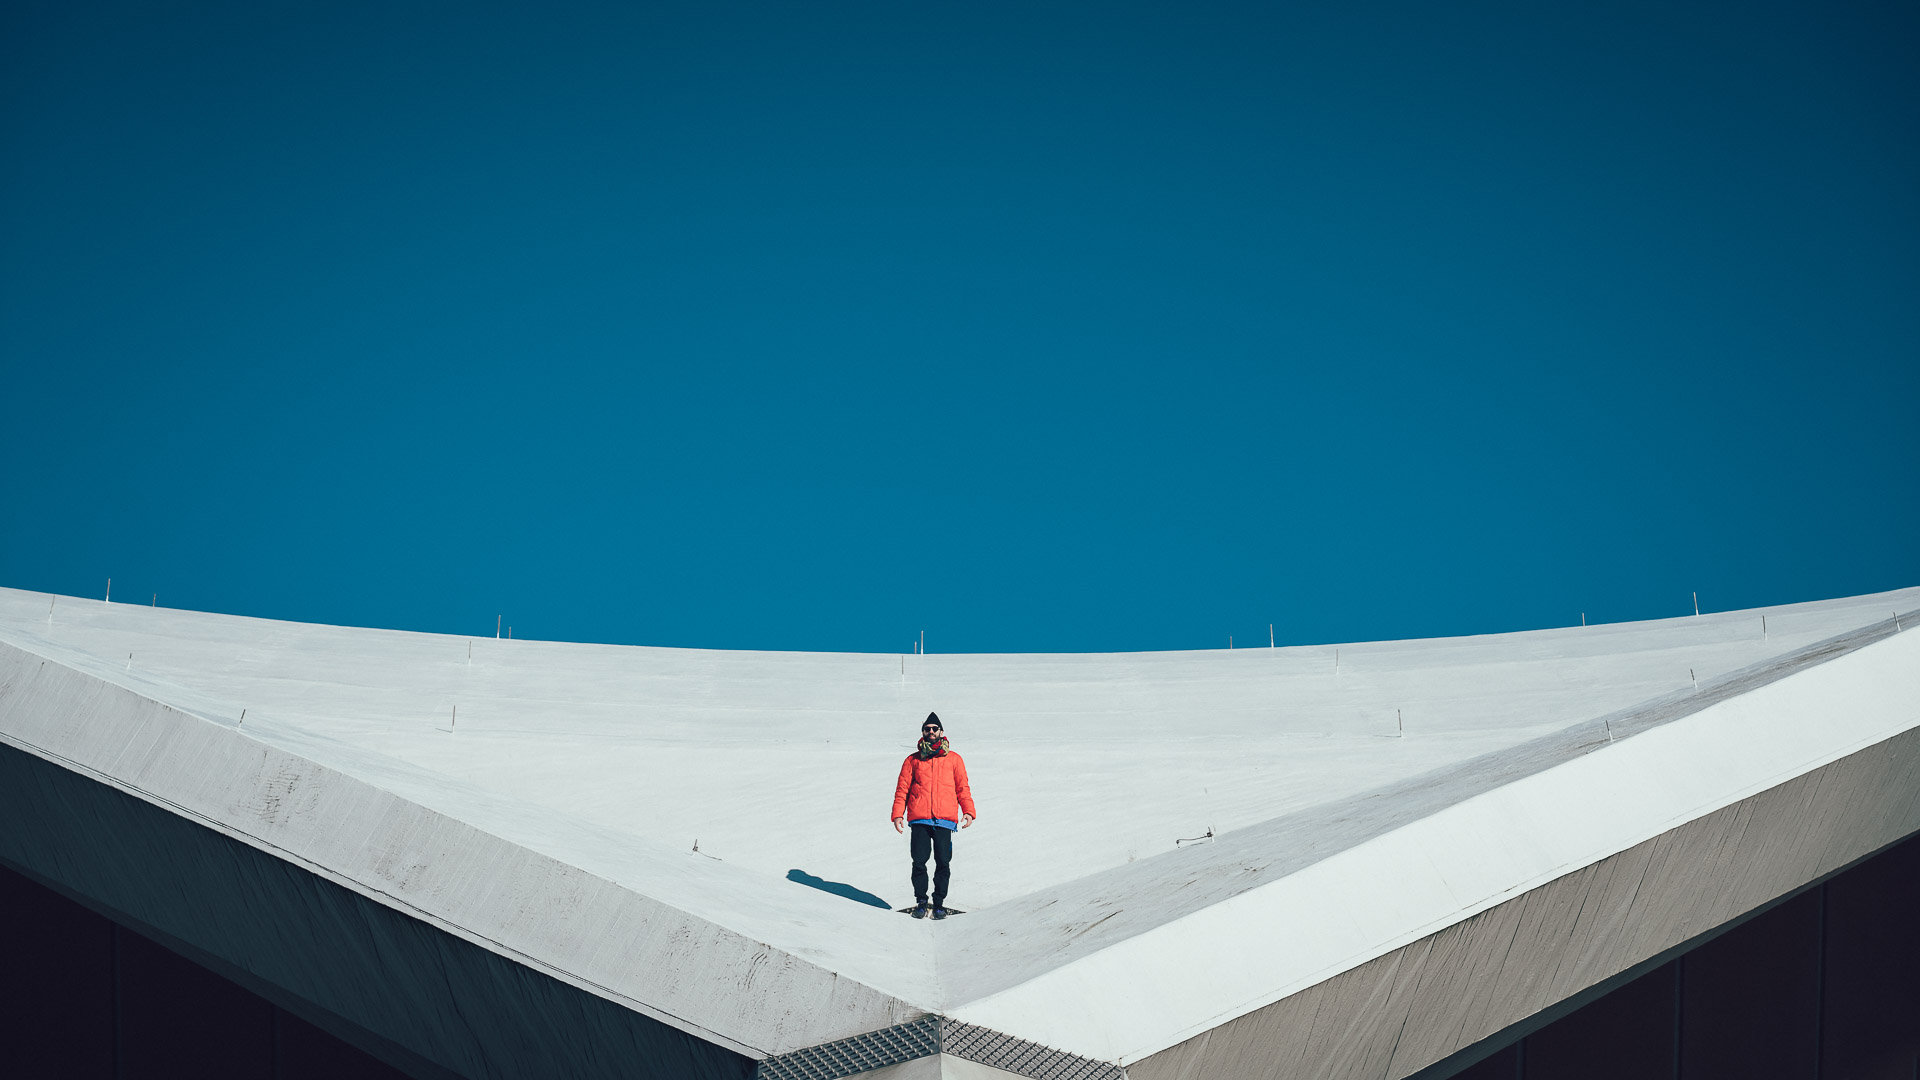 a man standing on a crazy rooftop in berlin , looks like on top of a snowy mountain